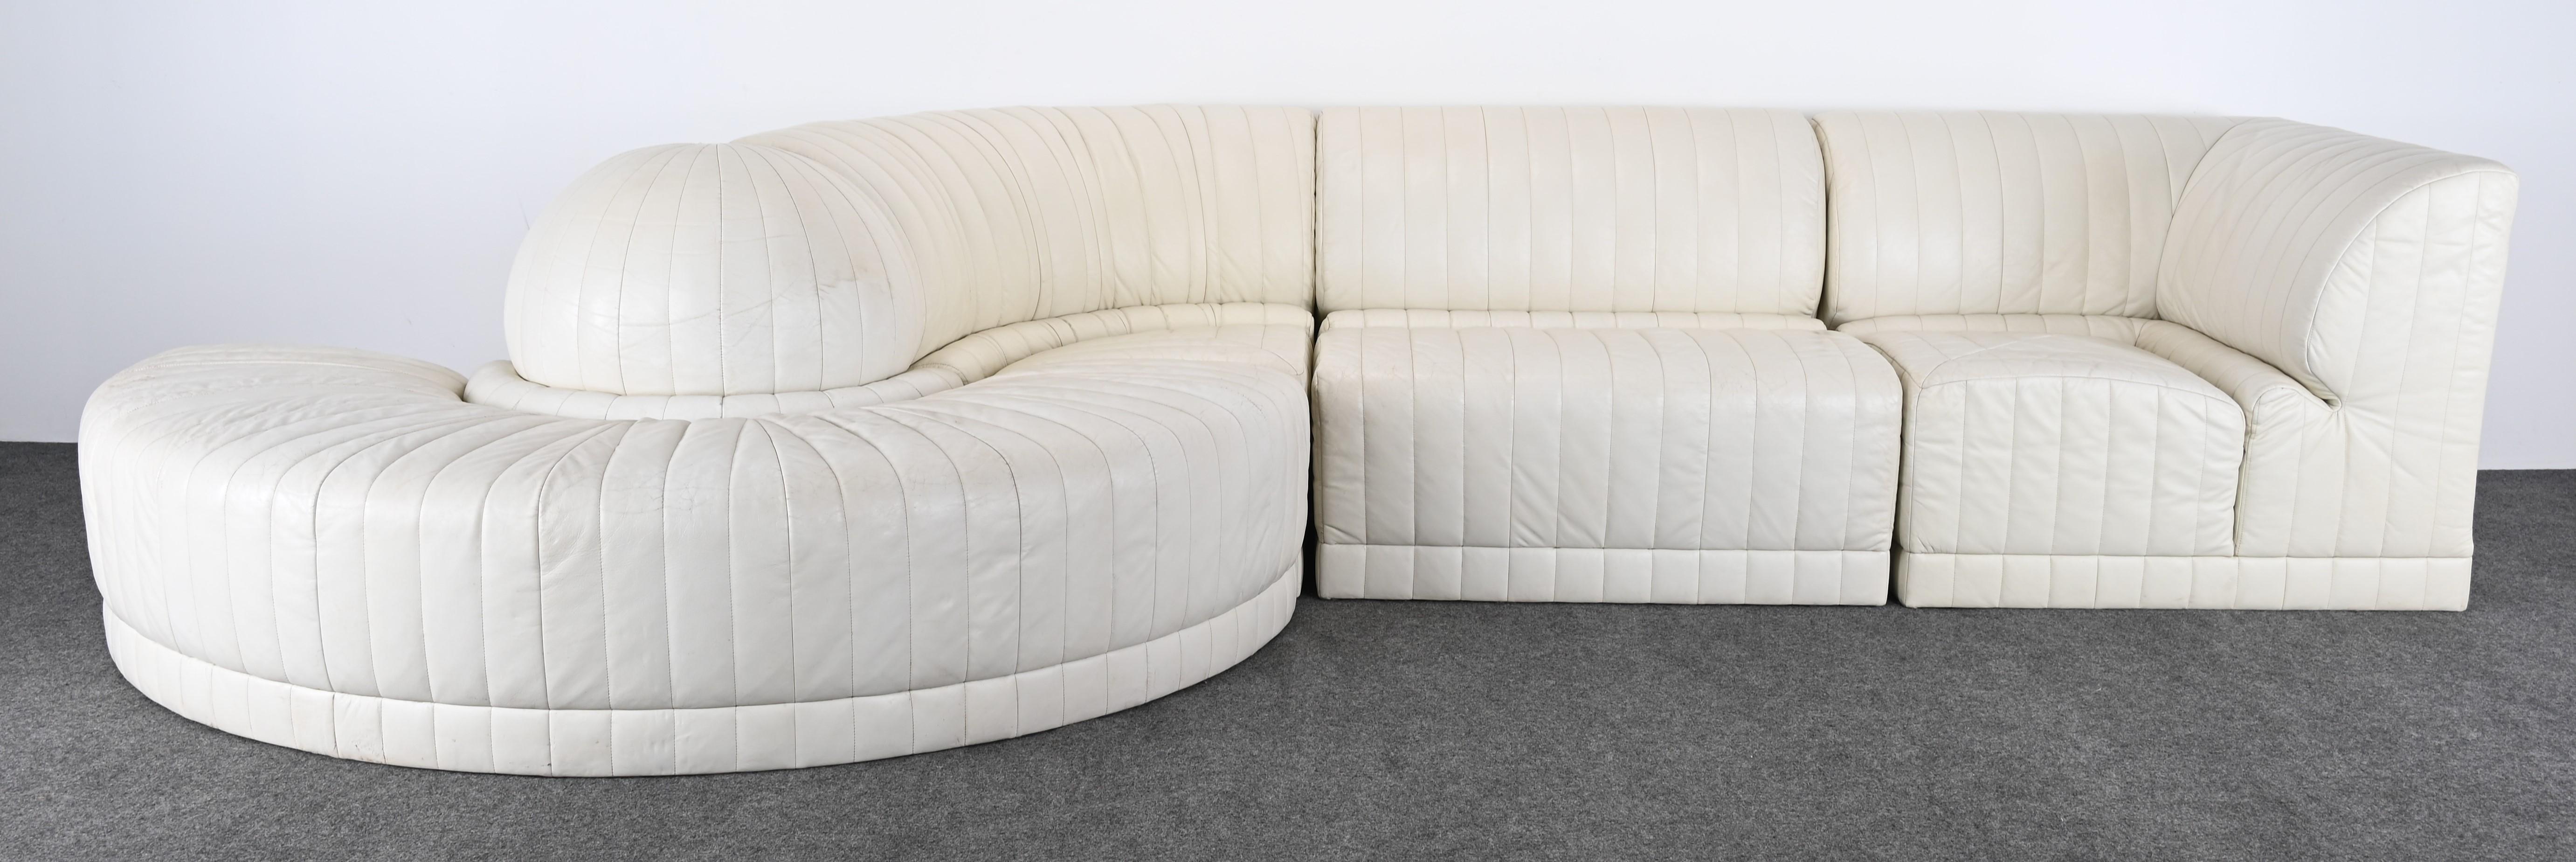 A fabulous four-piece white leather sectional sofa by Roche Bobois with channeled stitching and crescent accent. This piece would look great in any modern or contemporary interior. In good vintage condition with light wear to leather from use,